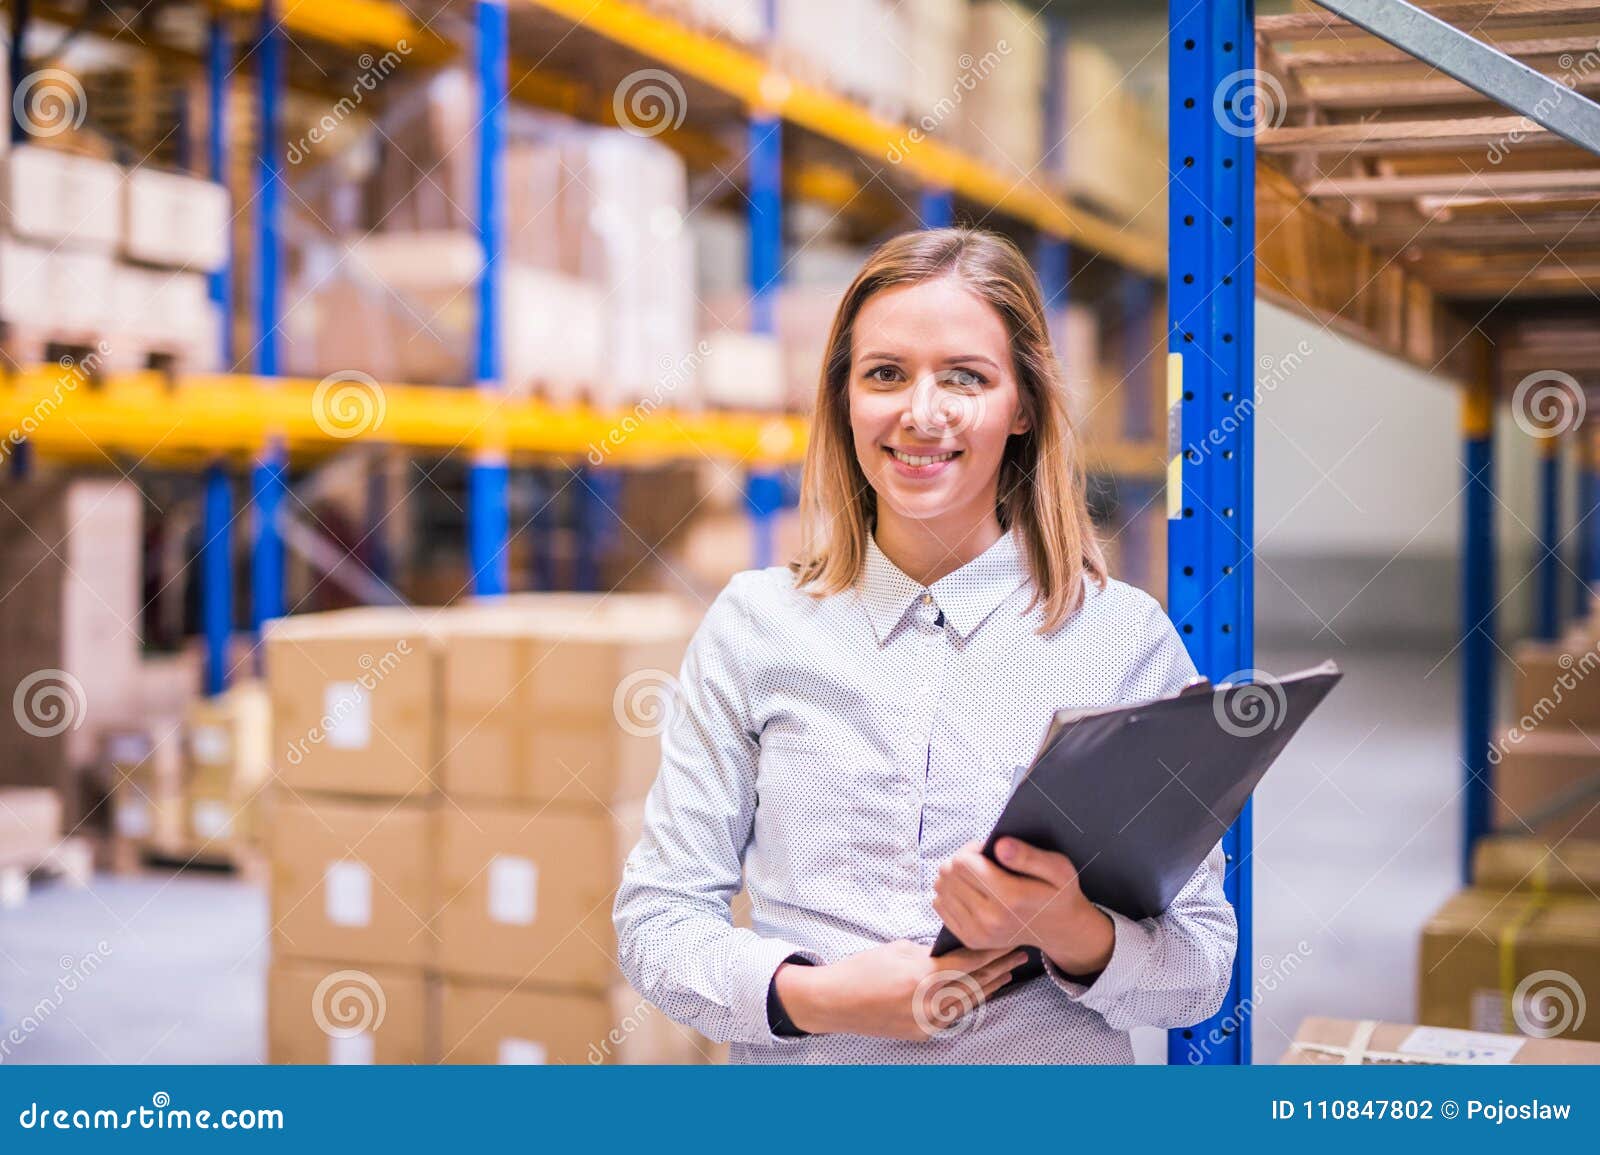 portrait of a woman warehouse worker or supervisor.